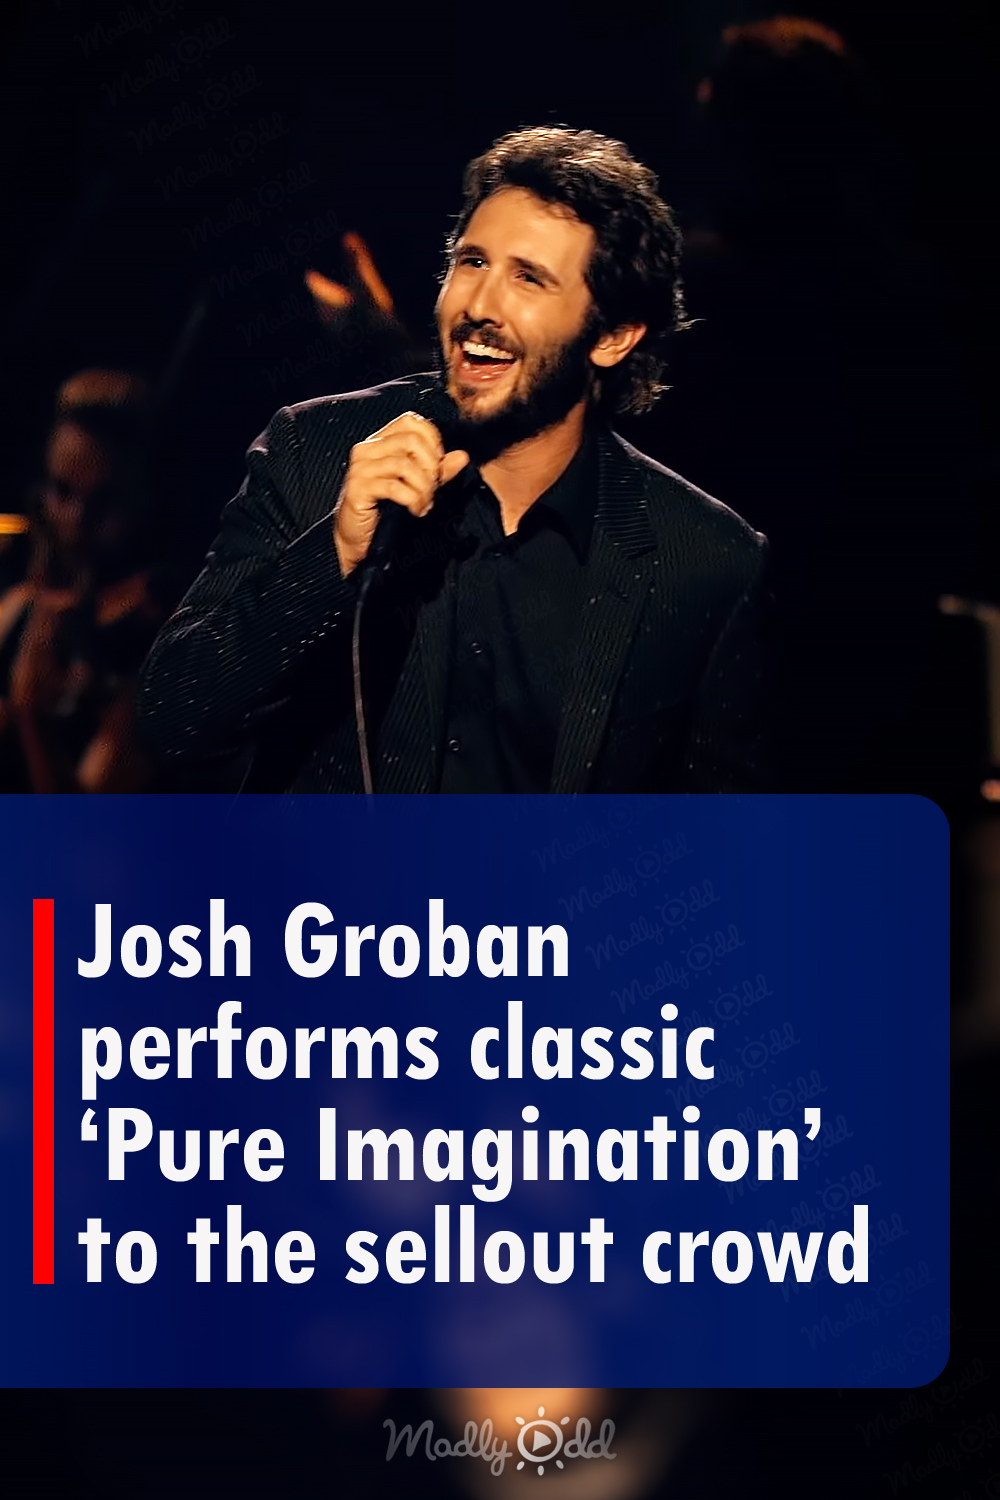 Josh Groban performs classic ‘Pure Imagination’ to a sold out show